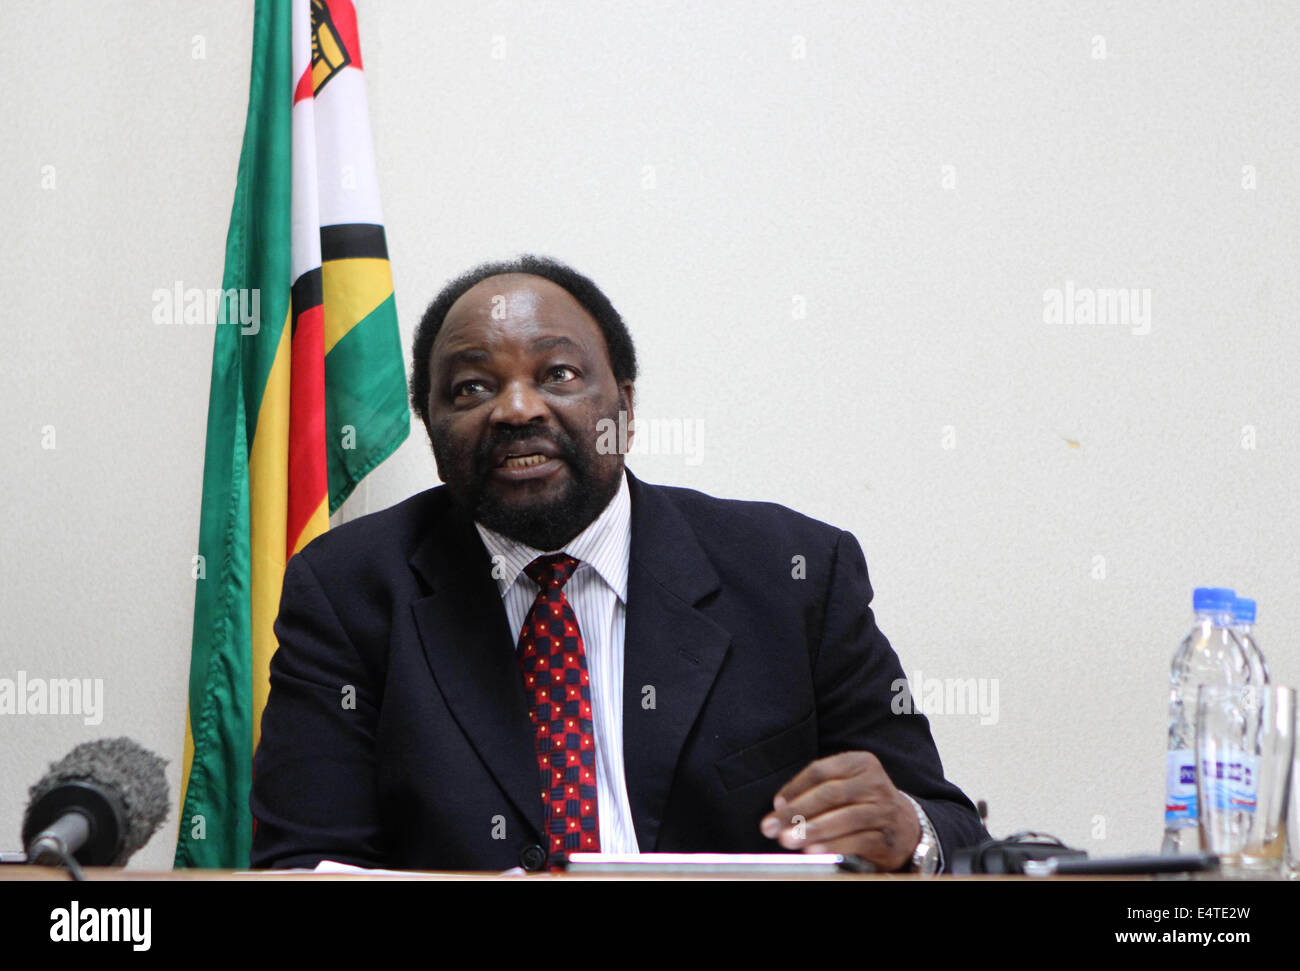 Harare, Zimbabwe. 16th July, 2014. Zimbabwean Foreign Affairs Minister Simbarashe Mumbengegwi addresses the media in Harare, Zimbabwe, July 16, 2014. Mumbengegwi announced that Zimbabwe will host the 34th Southern African Development Community (SADC) Heads of State and Government Summit in Victoria Falls from August 17 to 18 this year as Zimbabwean President Robert Mugabe assume the Chairmanship of the southern African block from Joyce Banda of the Republic of Malawi. © Stringer/Xinhua/Alamy Live News Stock Photo